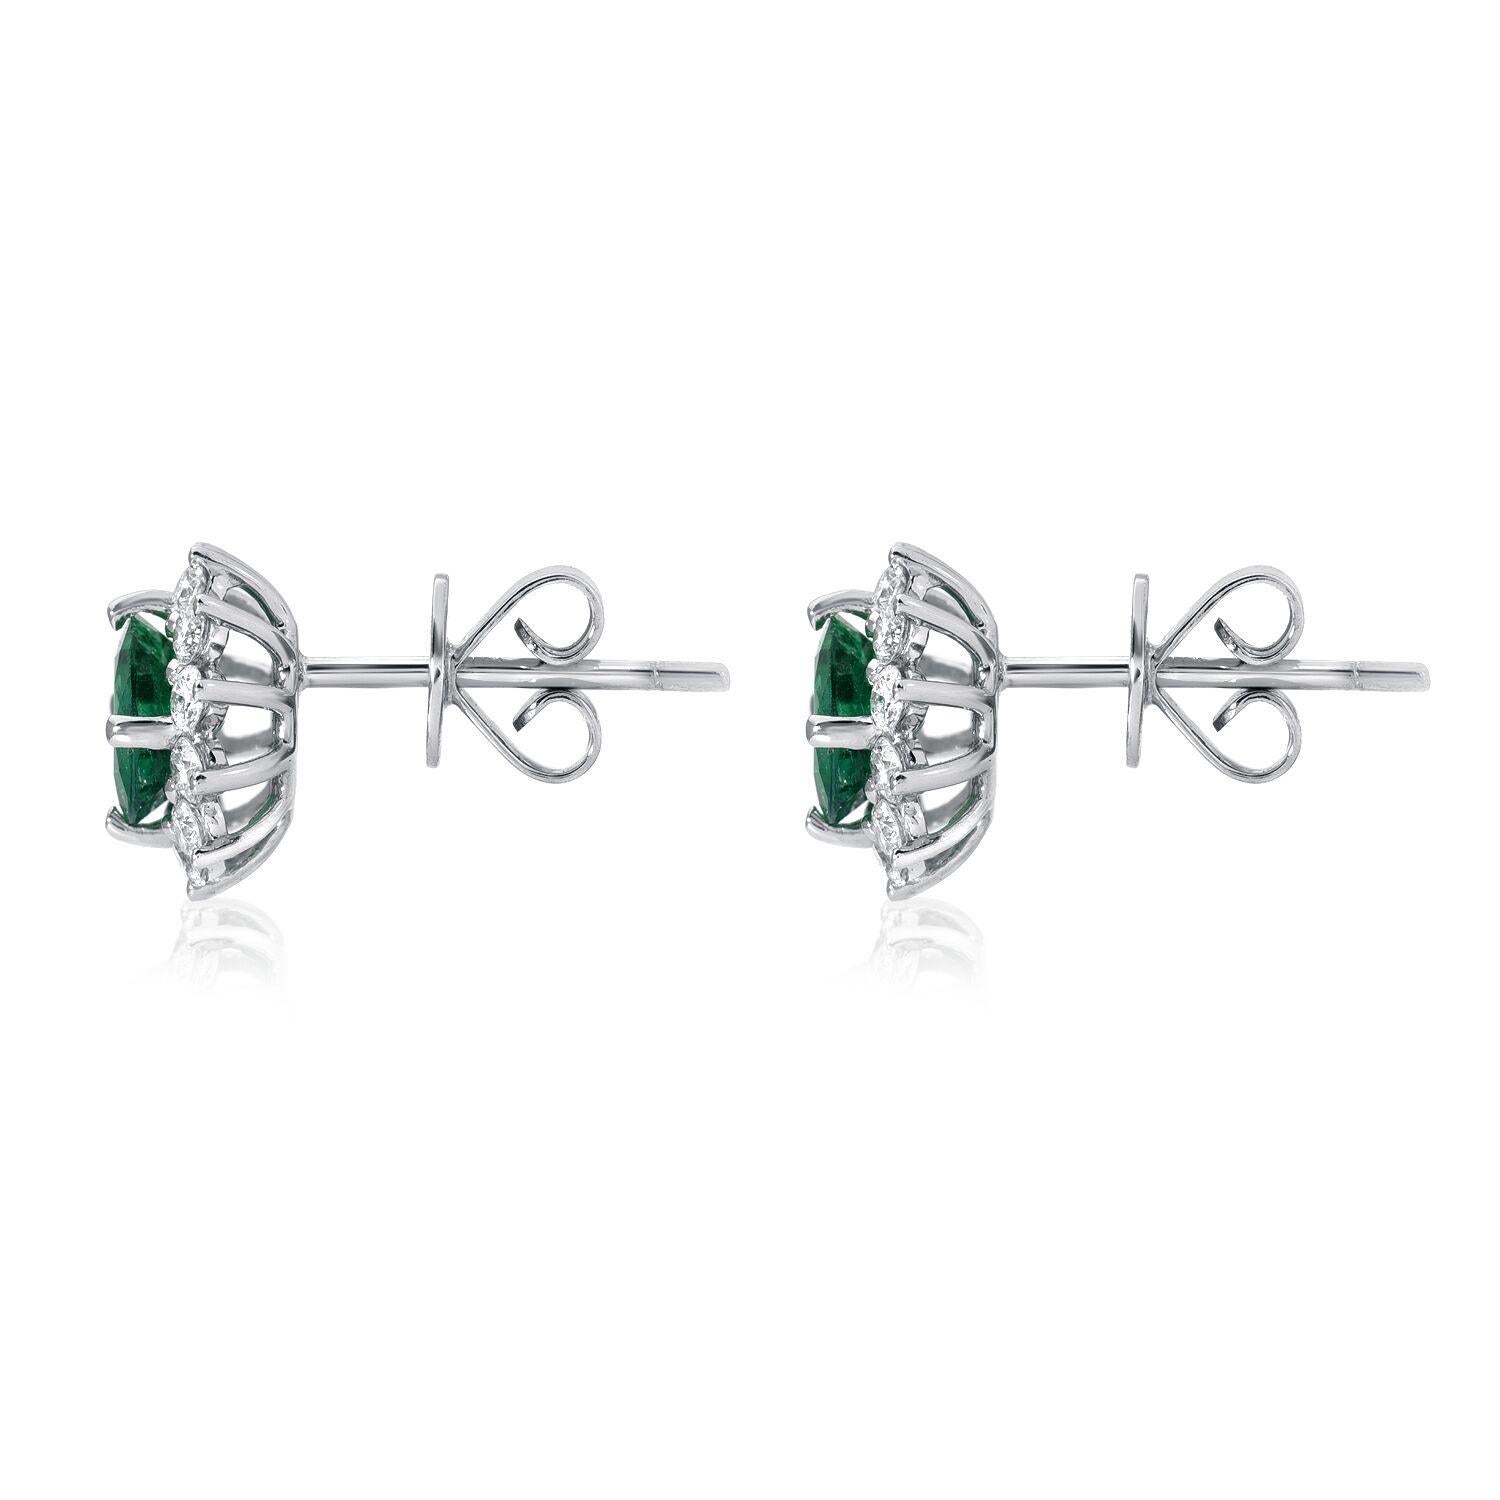 Emerald earrings featuring a pair of 1.29 carats total round Emeralds, framed by a total of 0.62 carat total round brilliant diamonds, in 18K white gold stud earrings.

Returns are accepted and paid by us within 7 days of delivery.

Emerald is the